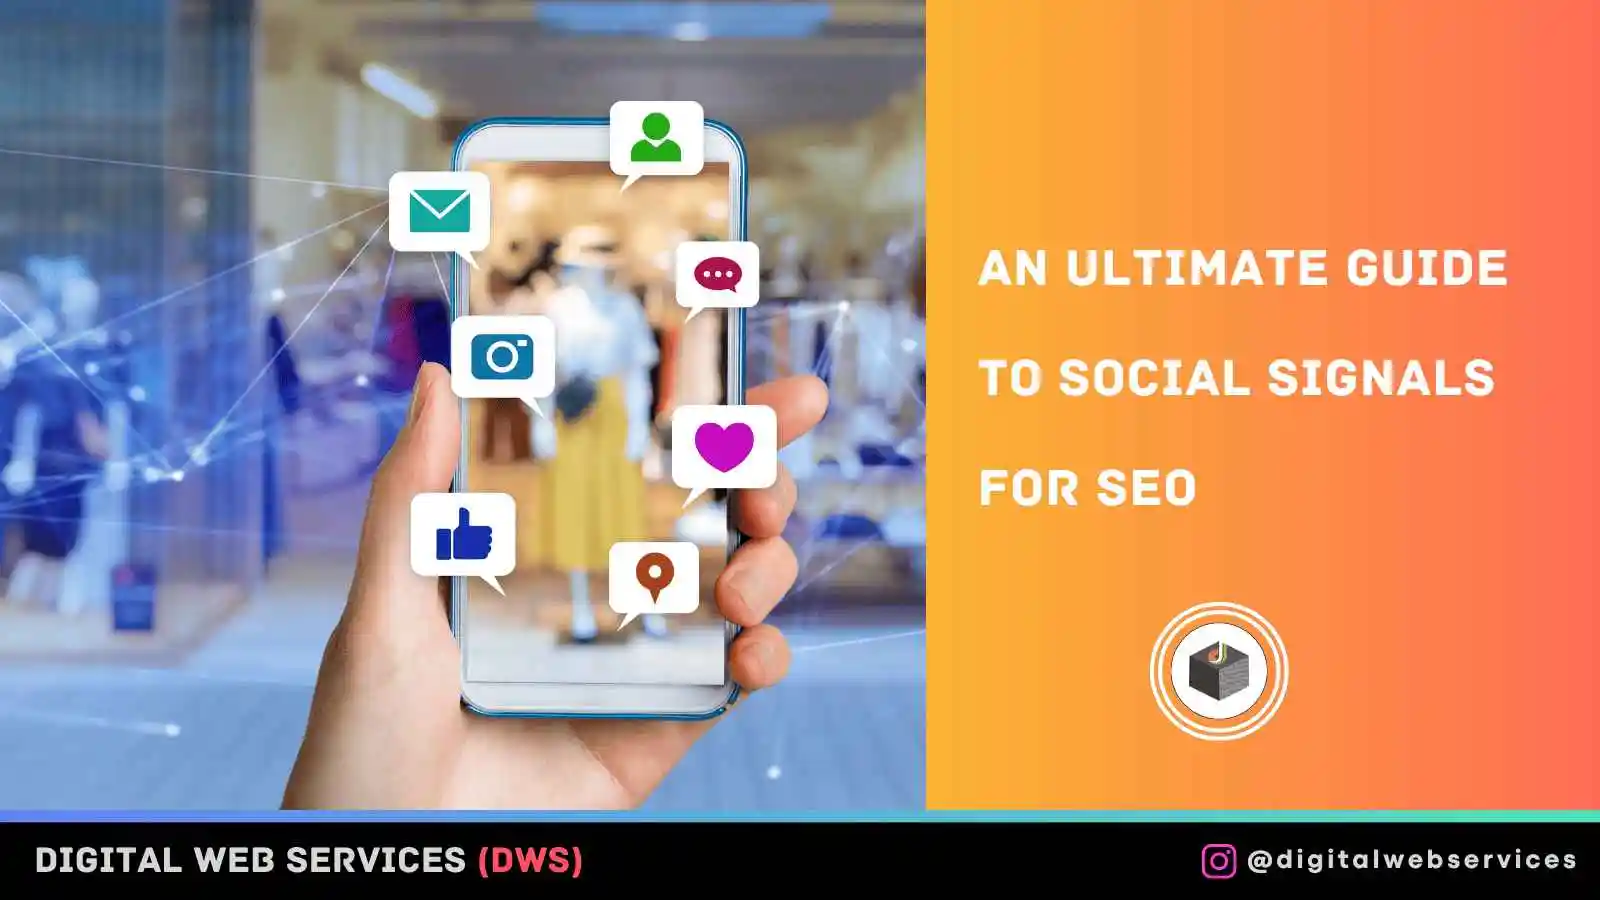 An Ultimate Guide To Social Signals For SEO